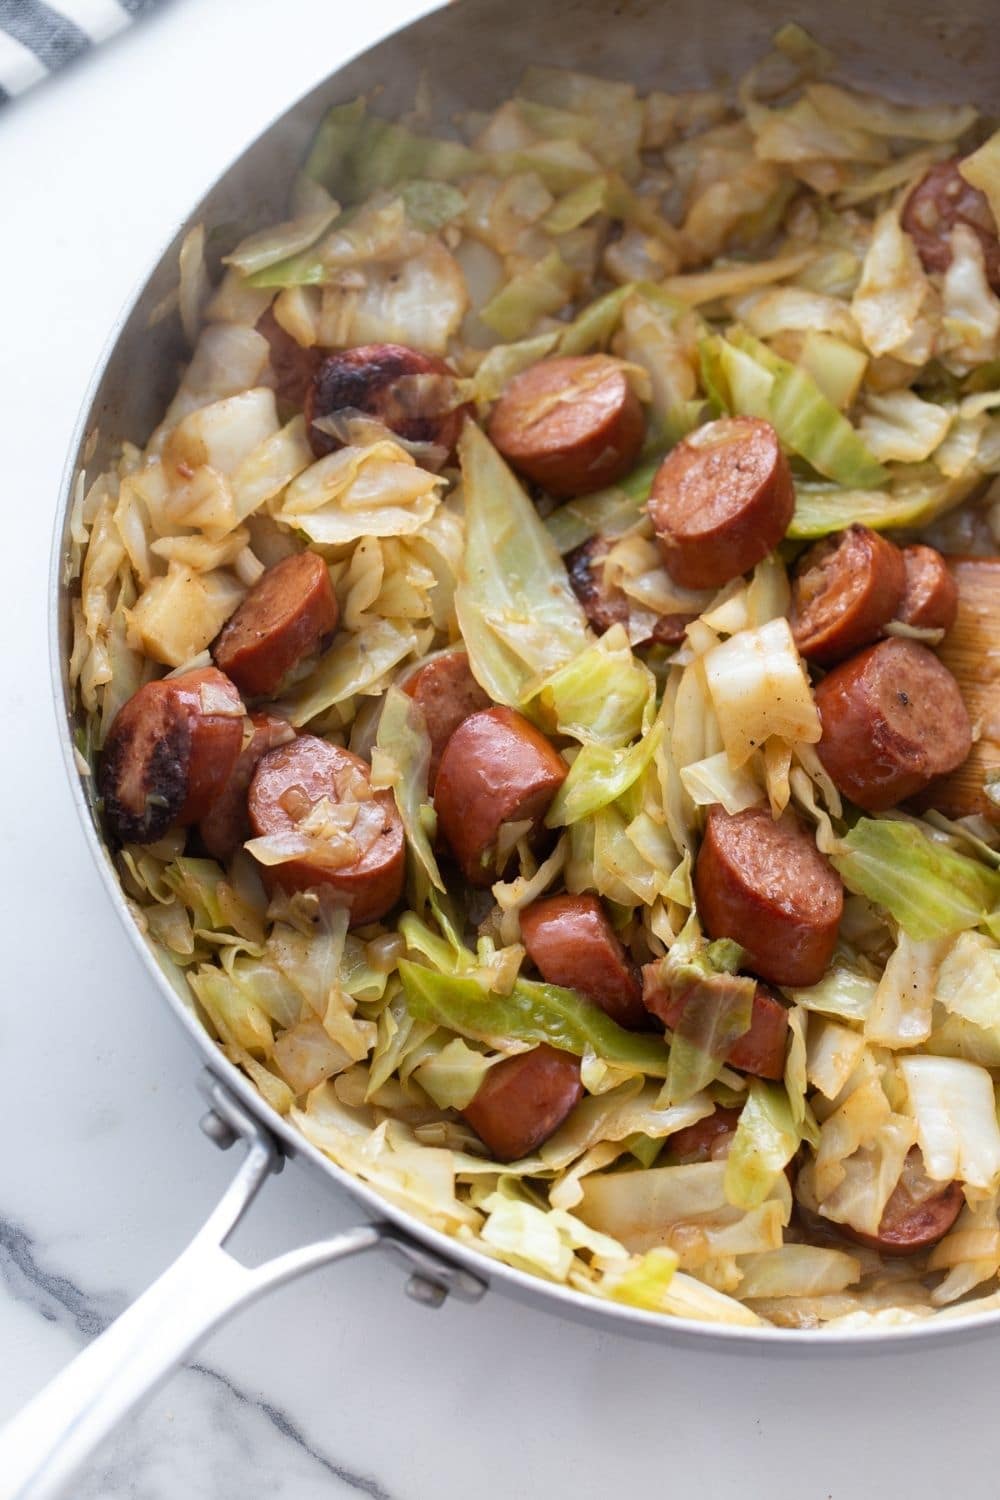 Close up photo of an easy one pan skillet meal perfect for keto and low carb diets - sliced smoked kielbasa sausage browning and caramelizing in a skillet with fresh cabbage, diced onions, garlic, and seasonings